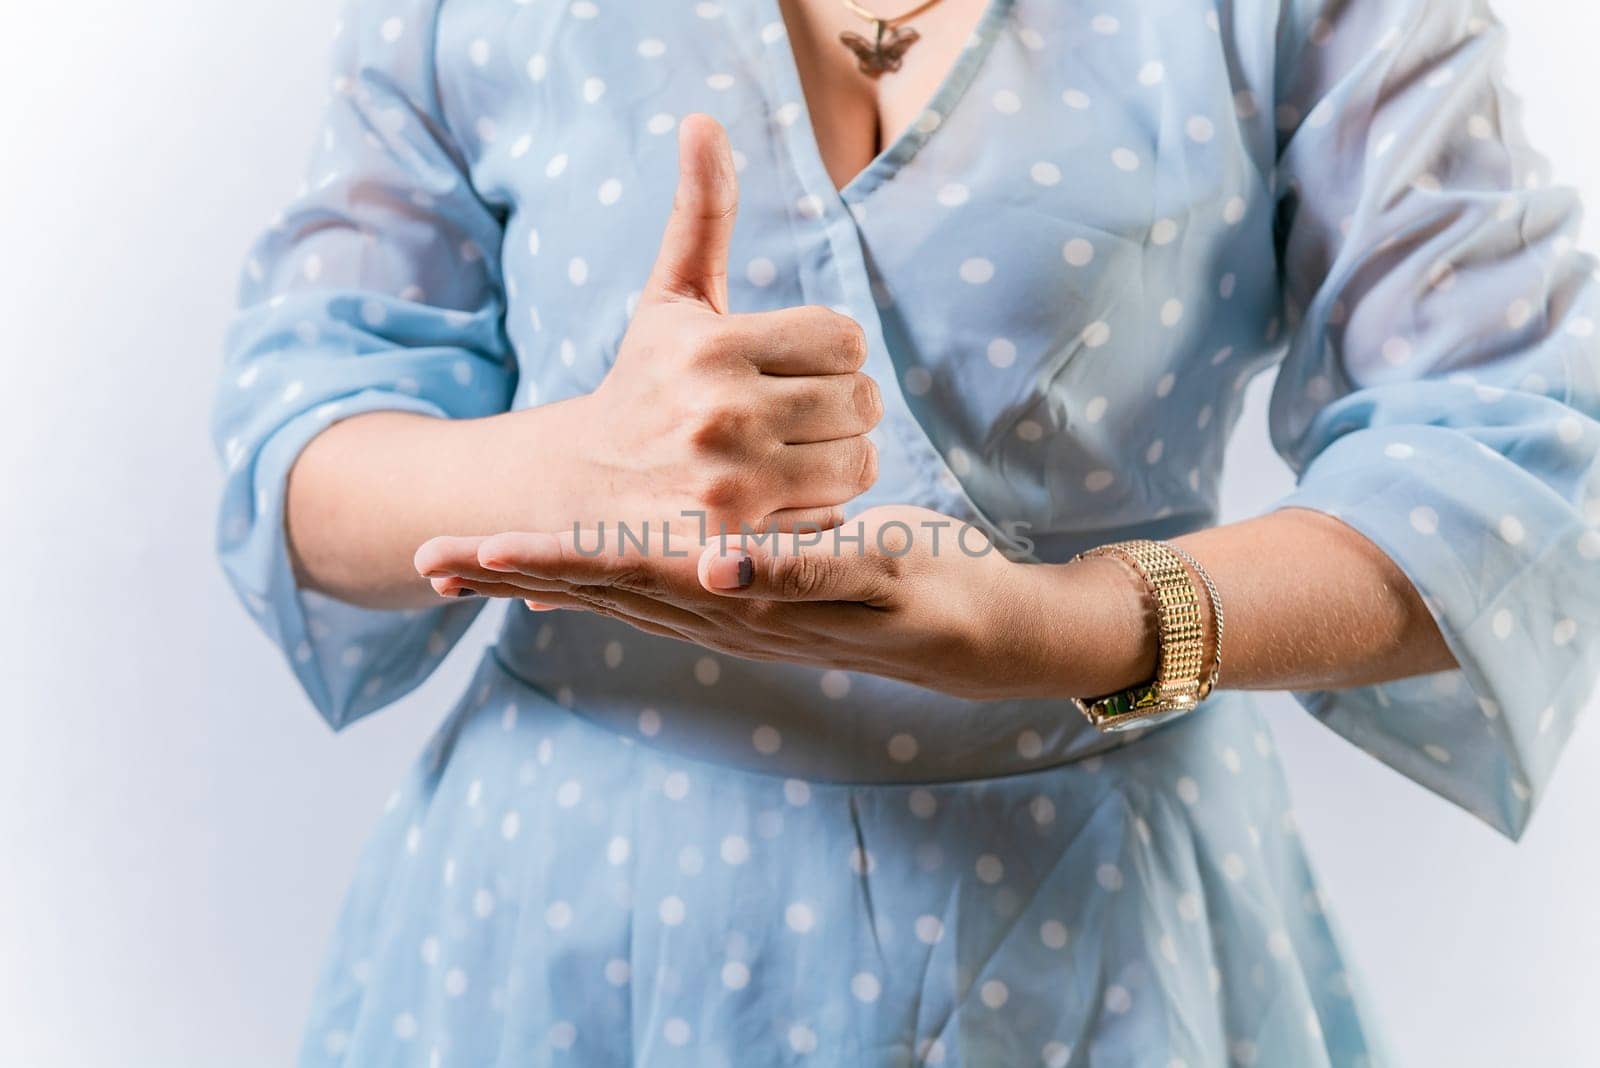 Hands of person gesturing help in sign language. Help gesture with hands in sign language by isaiphoto